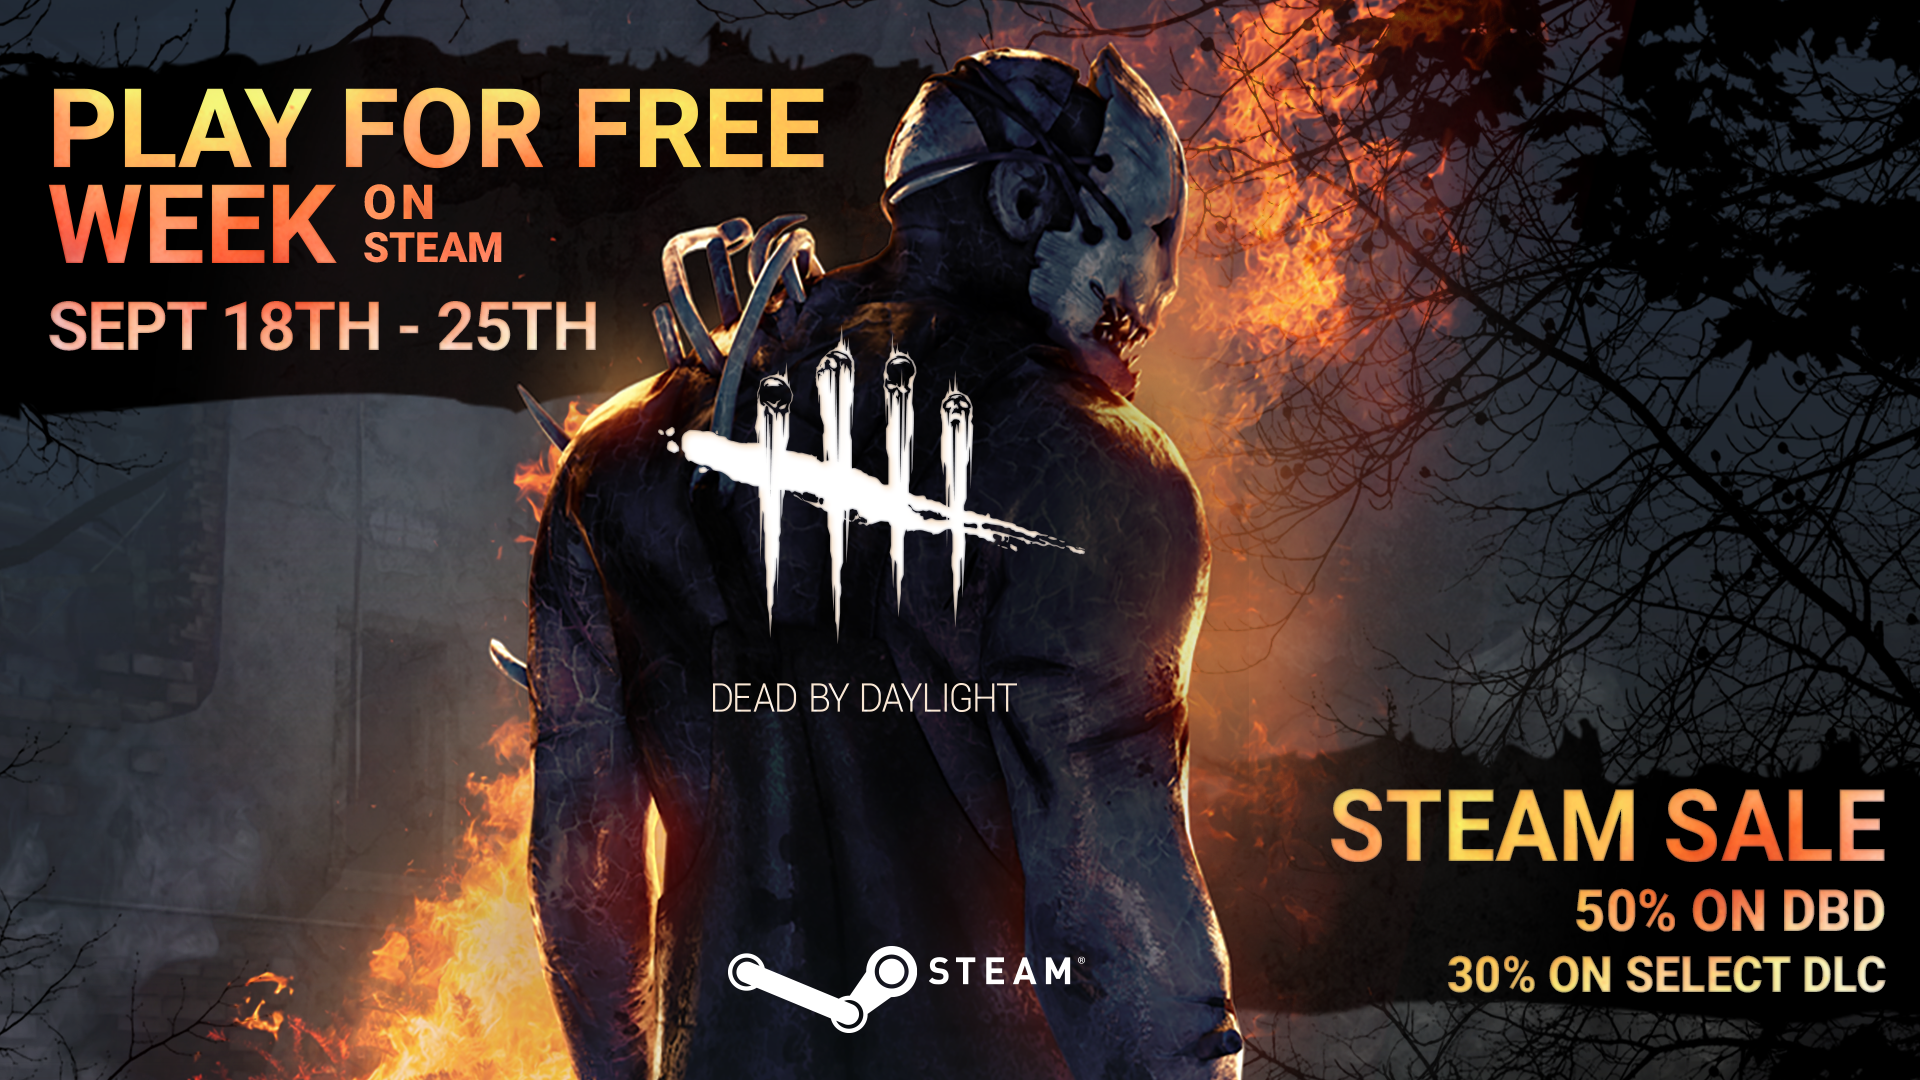 Steam Dead By Daylight Dead By Daylight Play For Free All Week